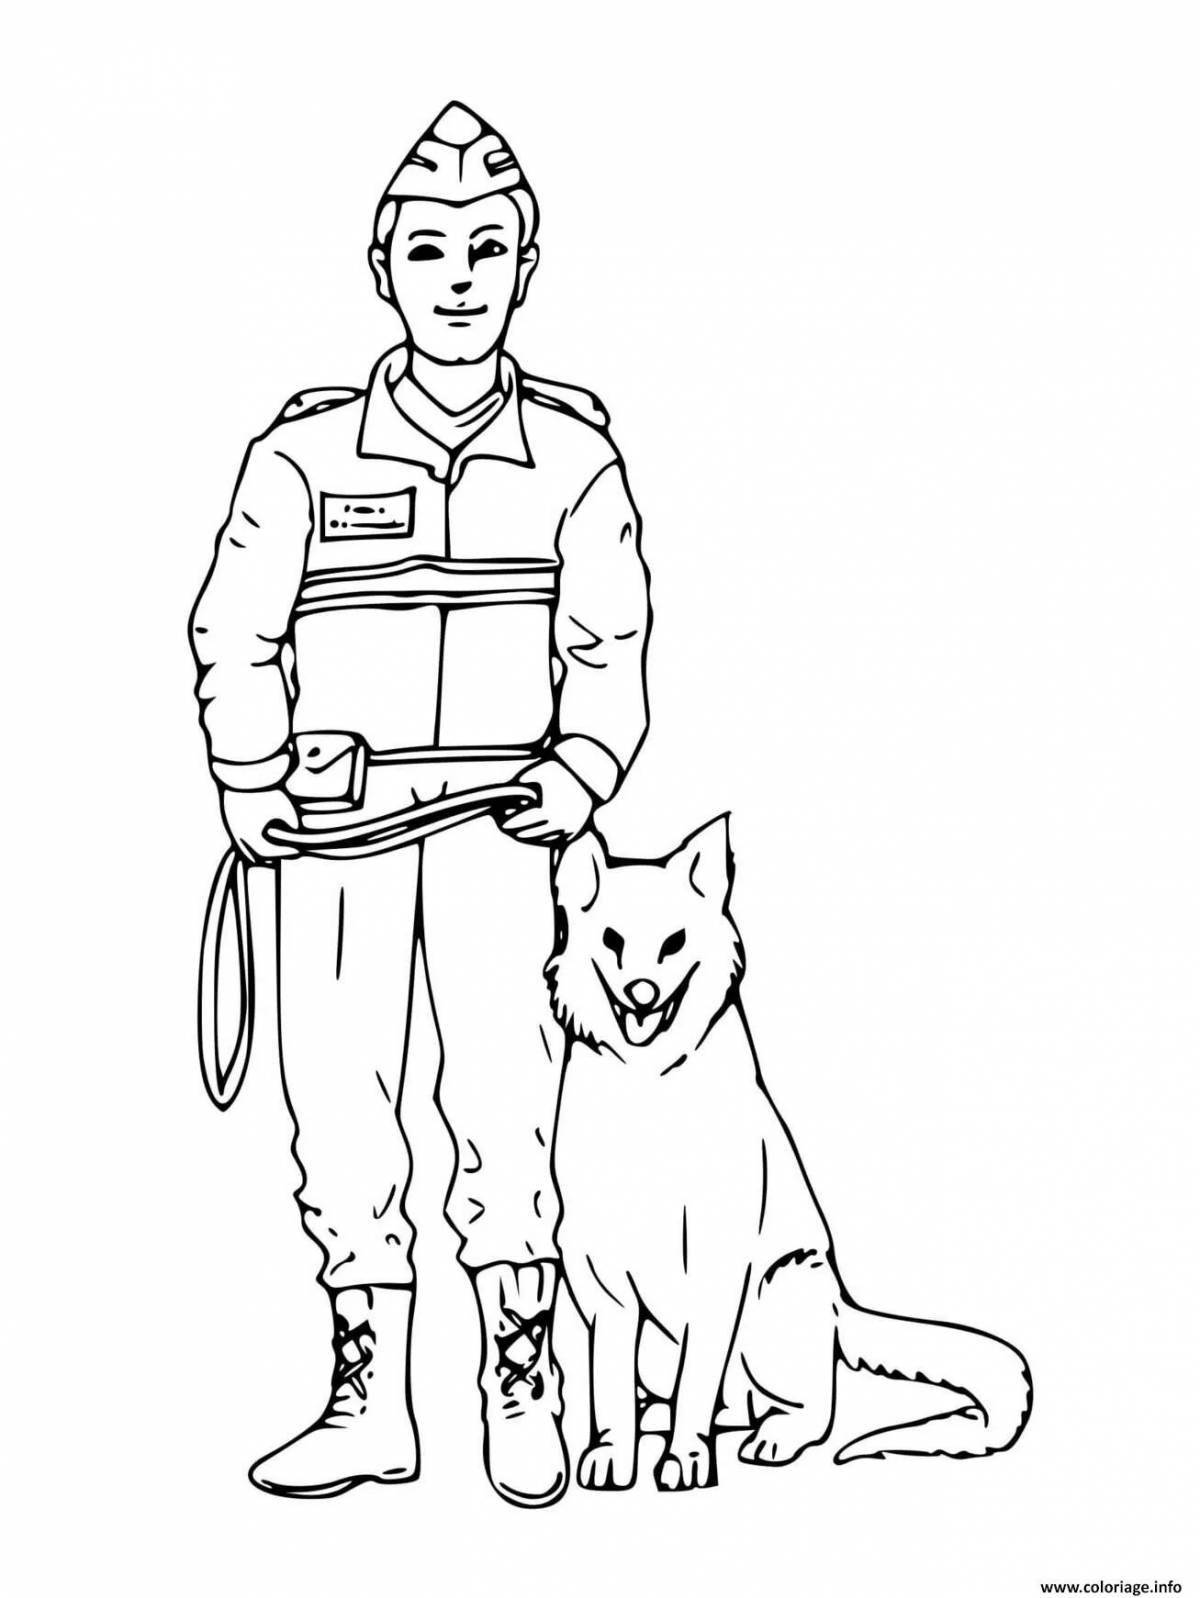 A fascinating coloring book about the military profession for children 3-4 years old